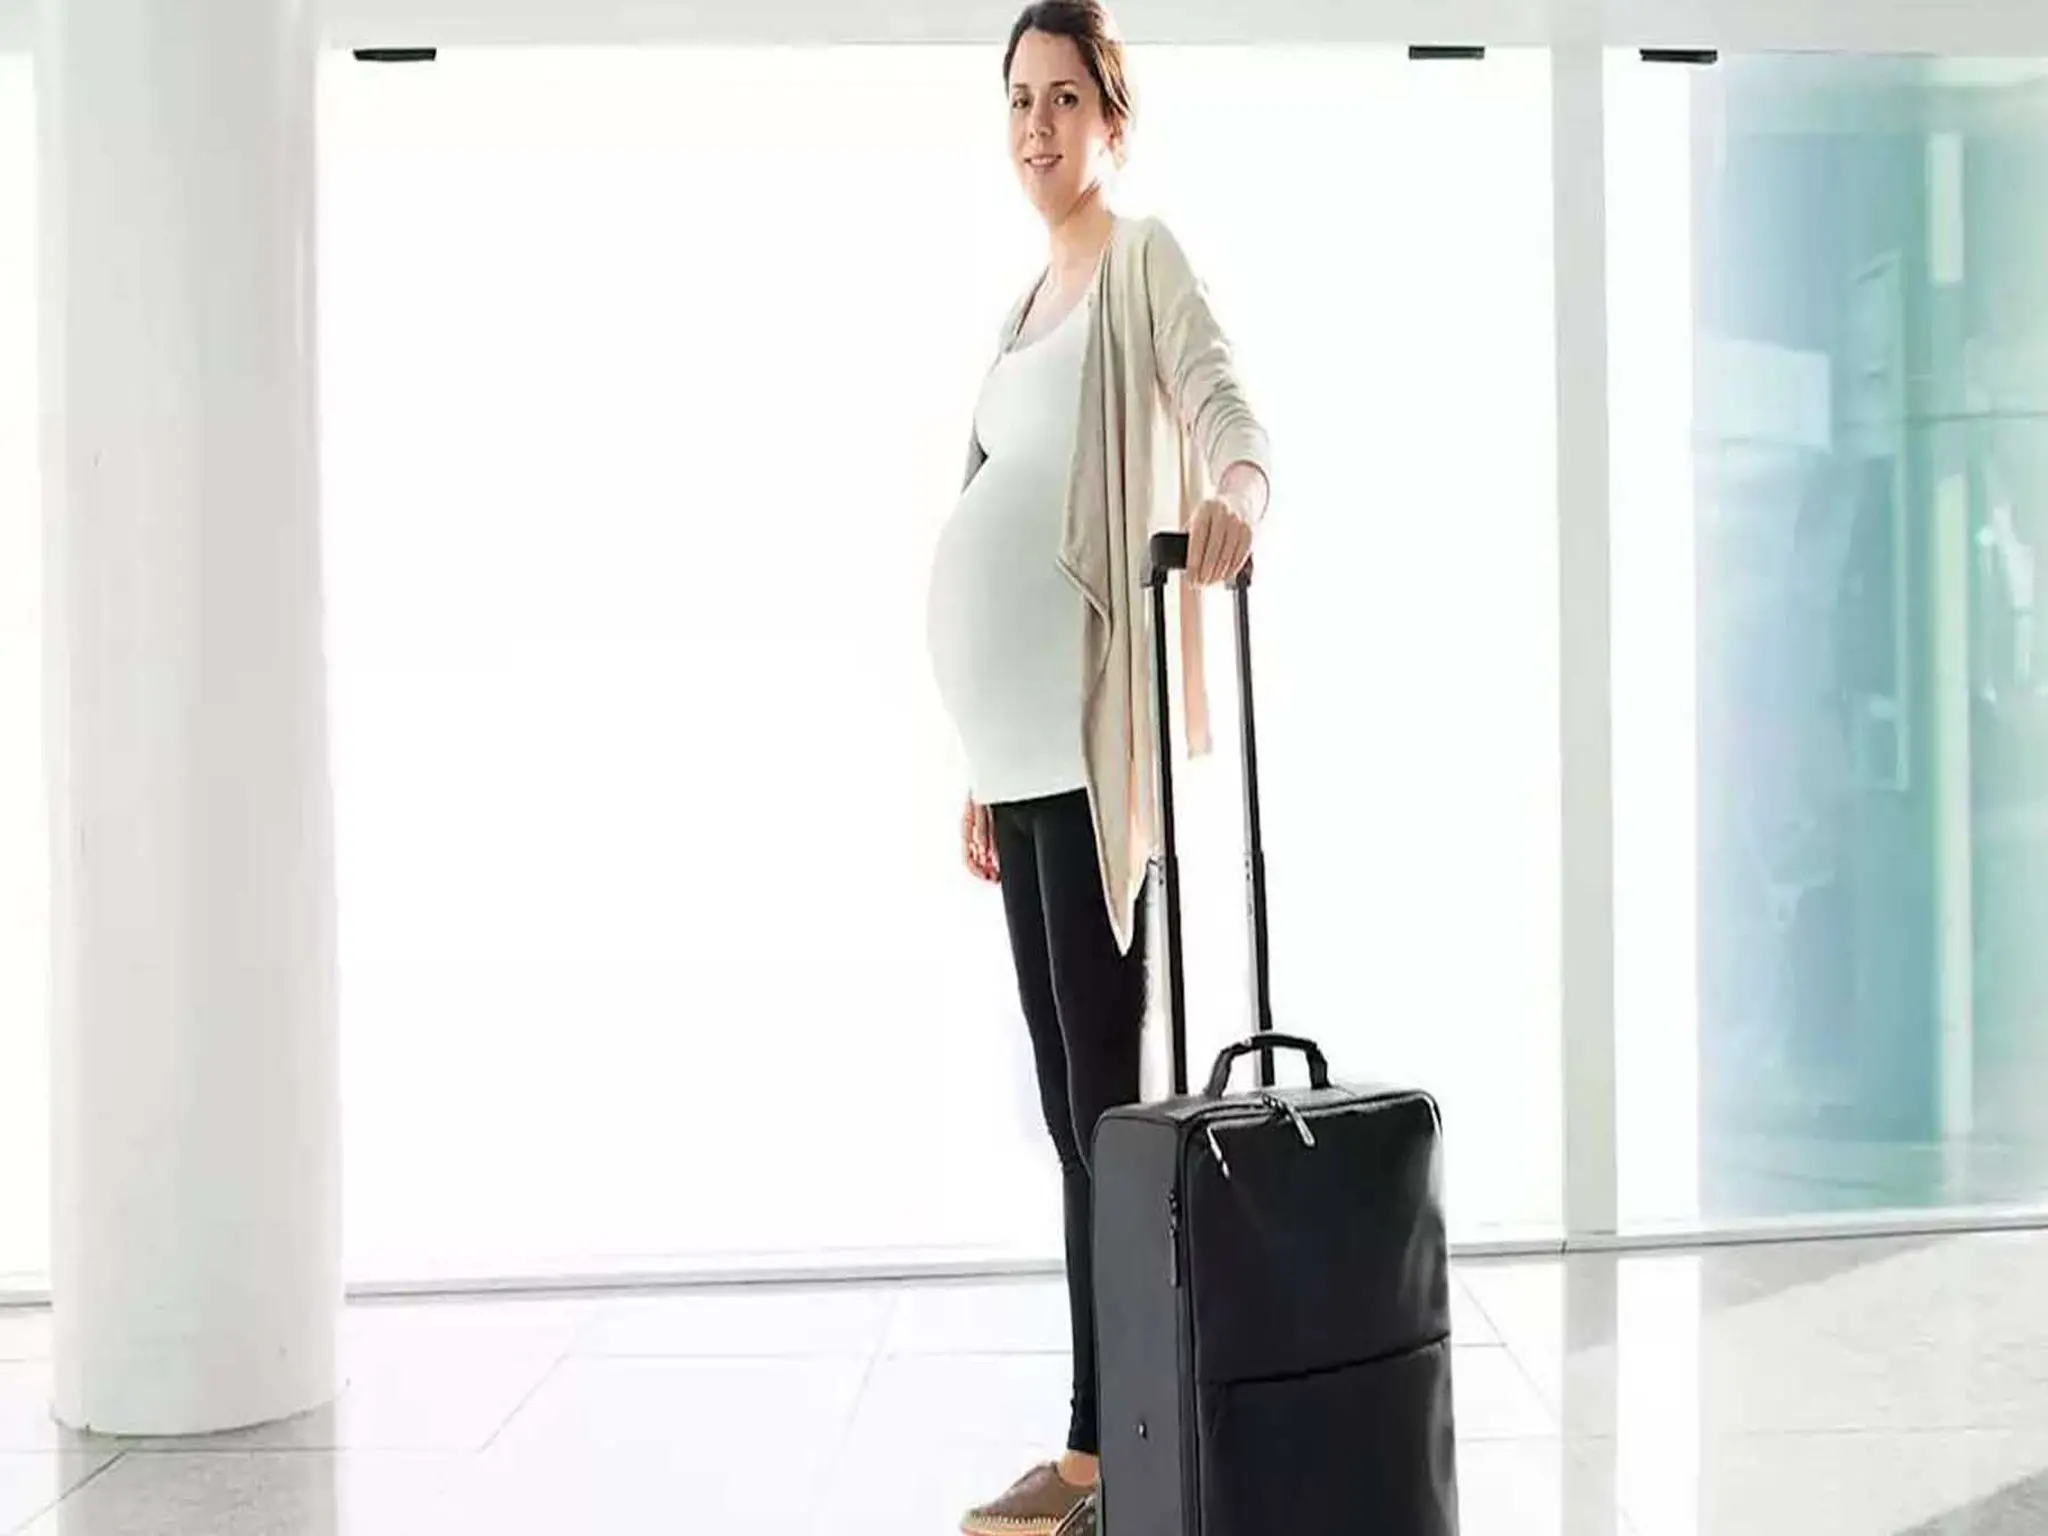 The Emirates sets rules and guidelines for pregnant women to travel through its airlines